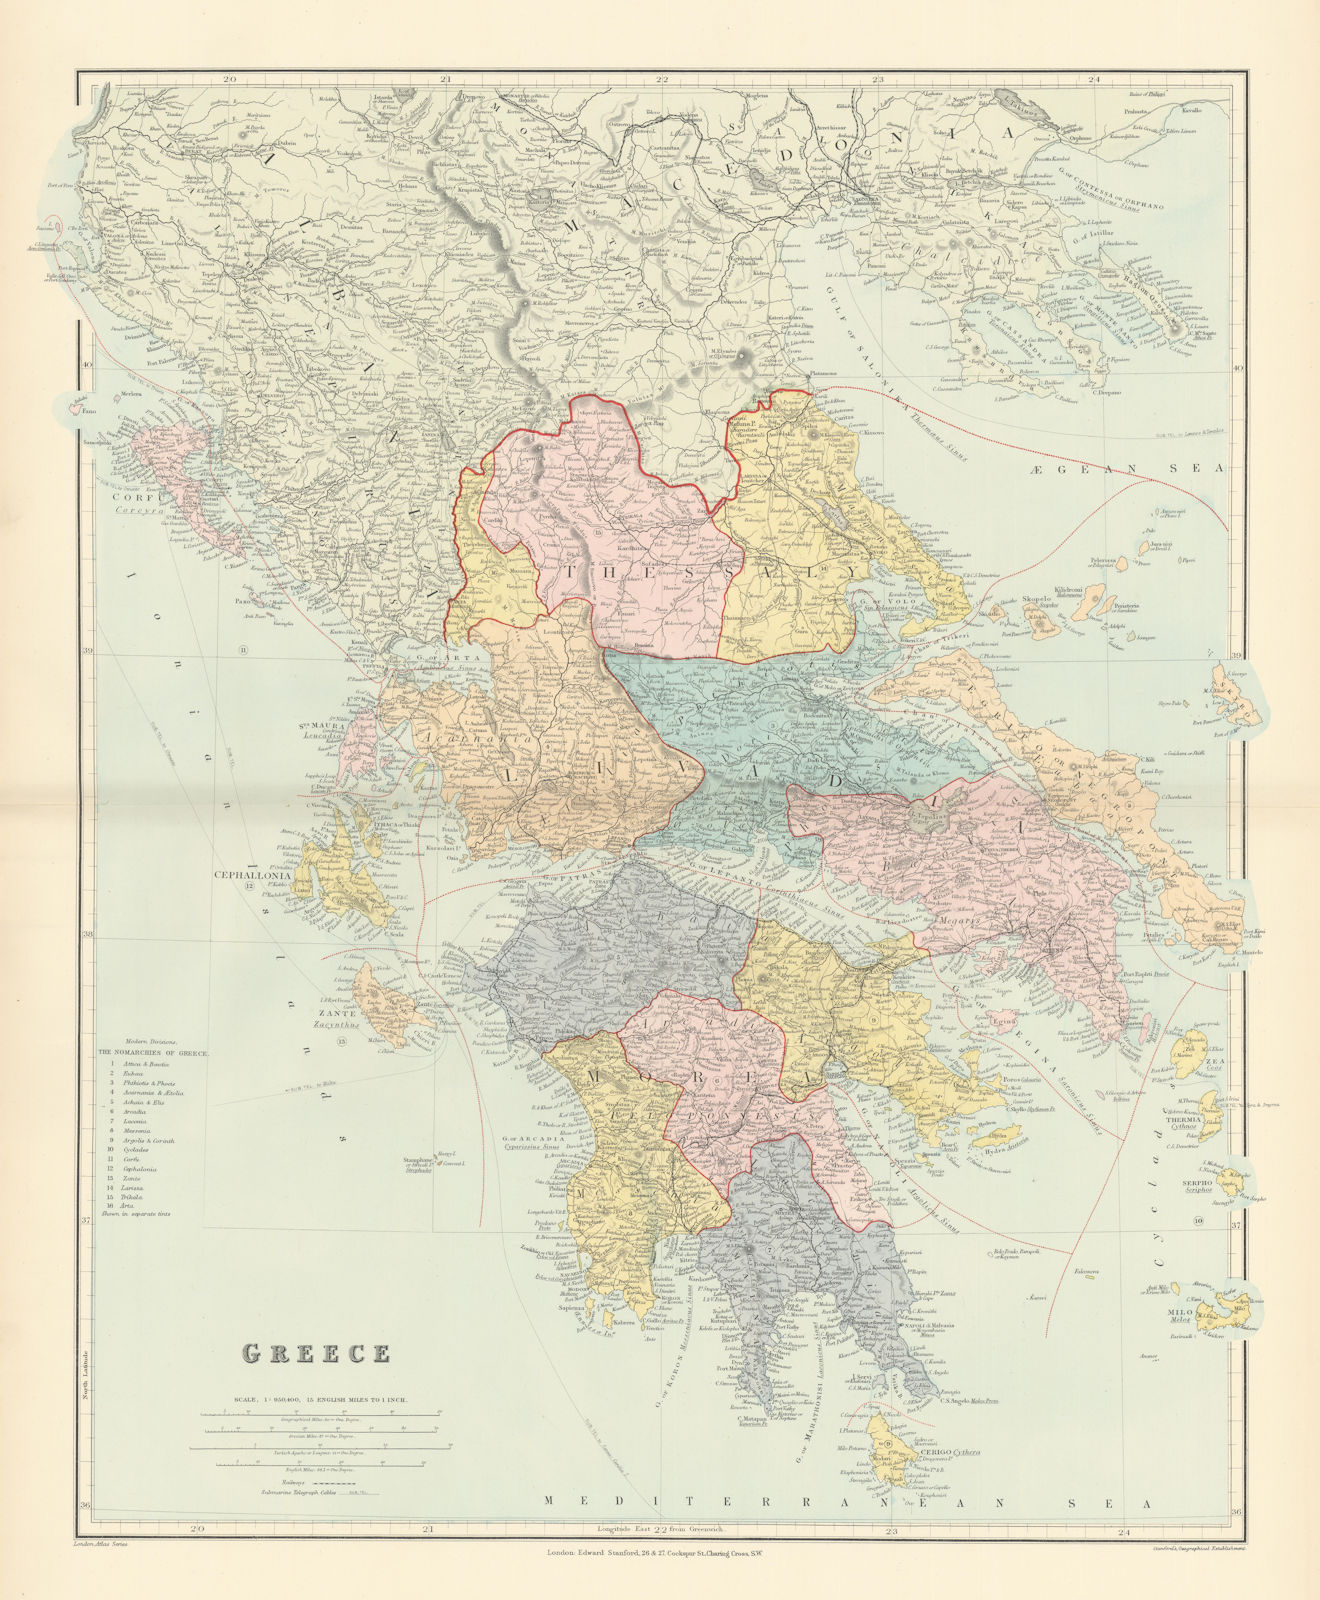 Greece. Nomarchies. Ionian Sporades Cyclades Morea Livadia. STANFORD 1896 map